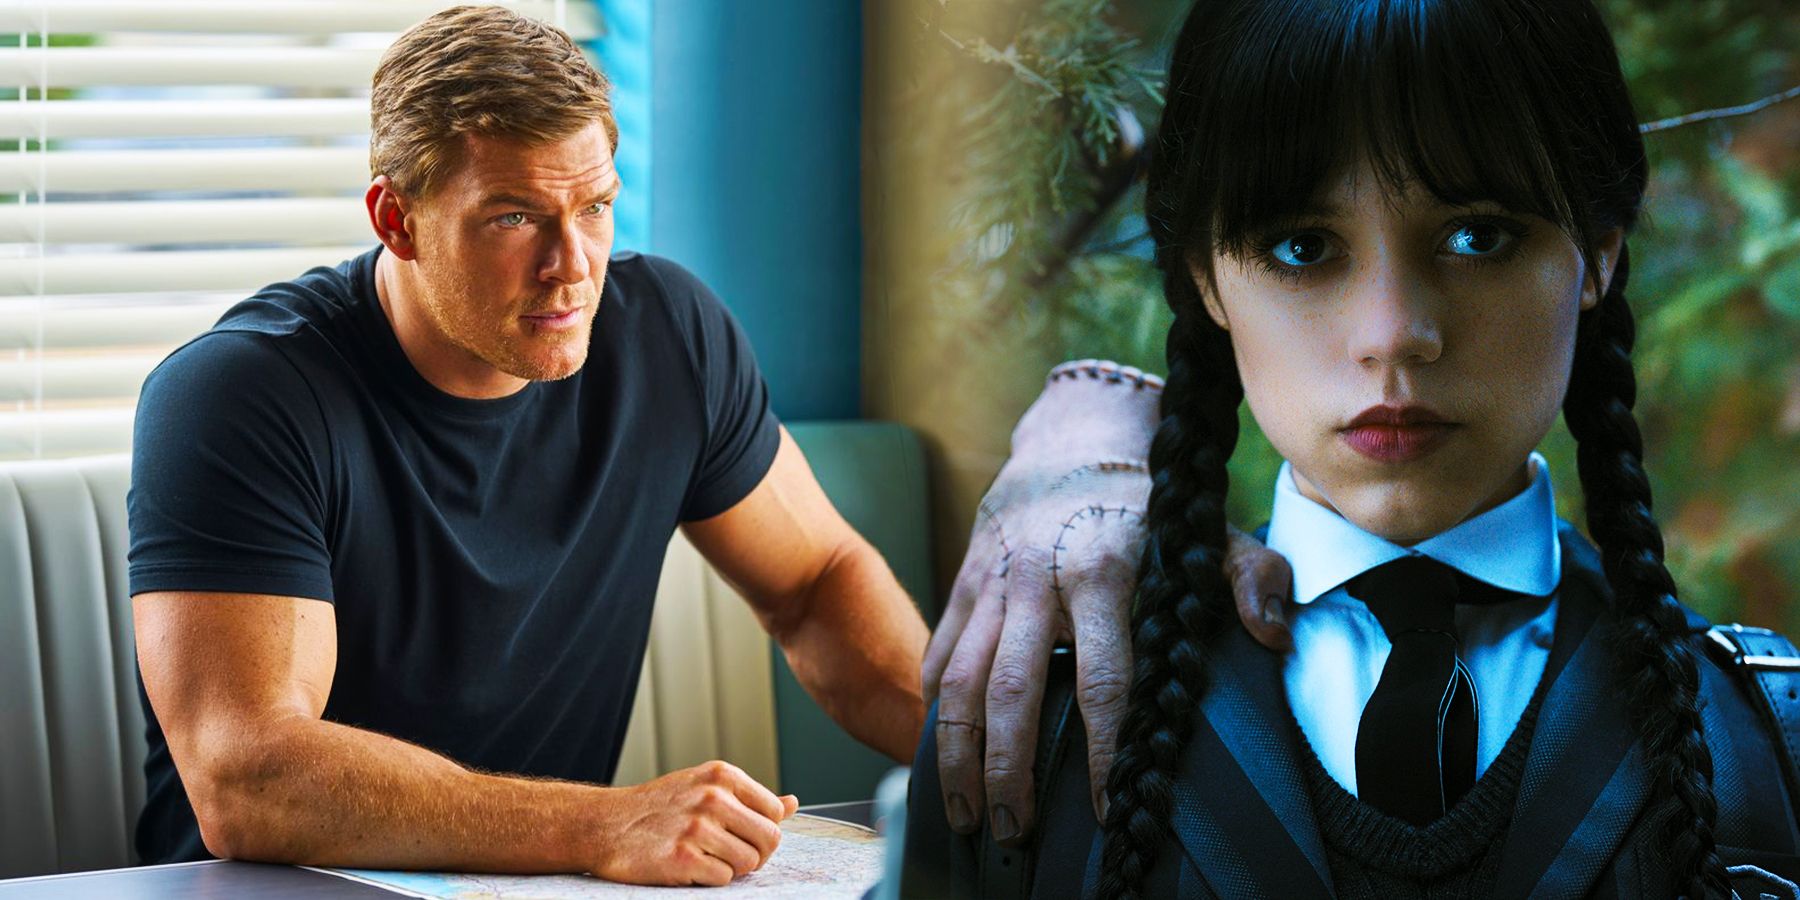 On the left, Jack Reacher sits at a booth with a hand resintg on the table. On the right, Wednesday from show 'Wednesday' looks out with intrigue as Thing sits on her shoulder.